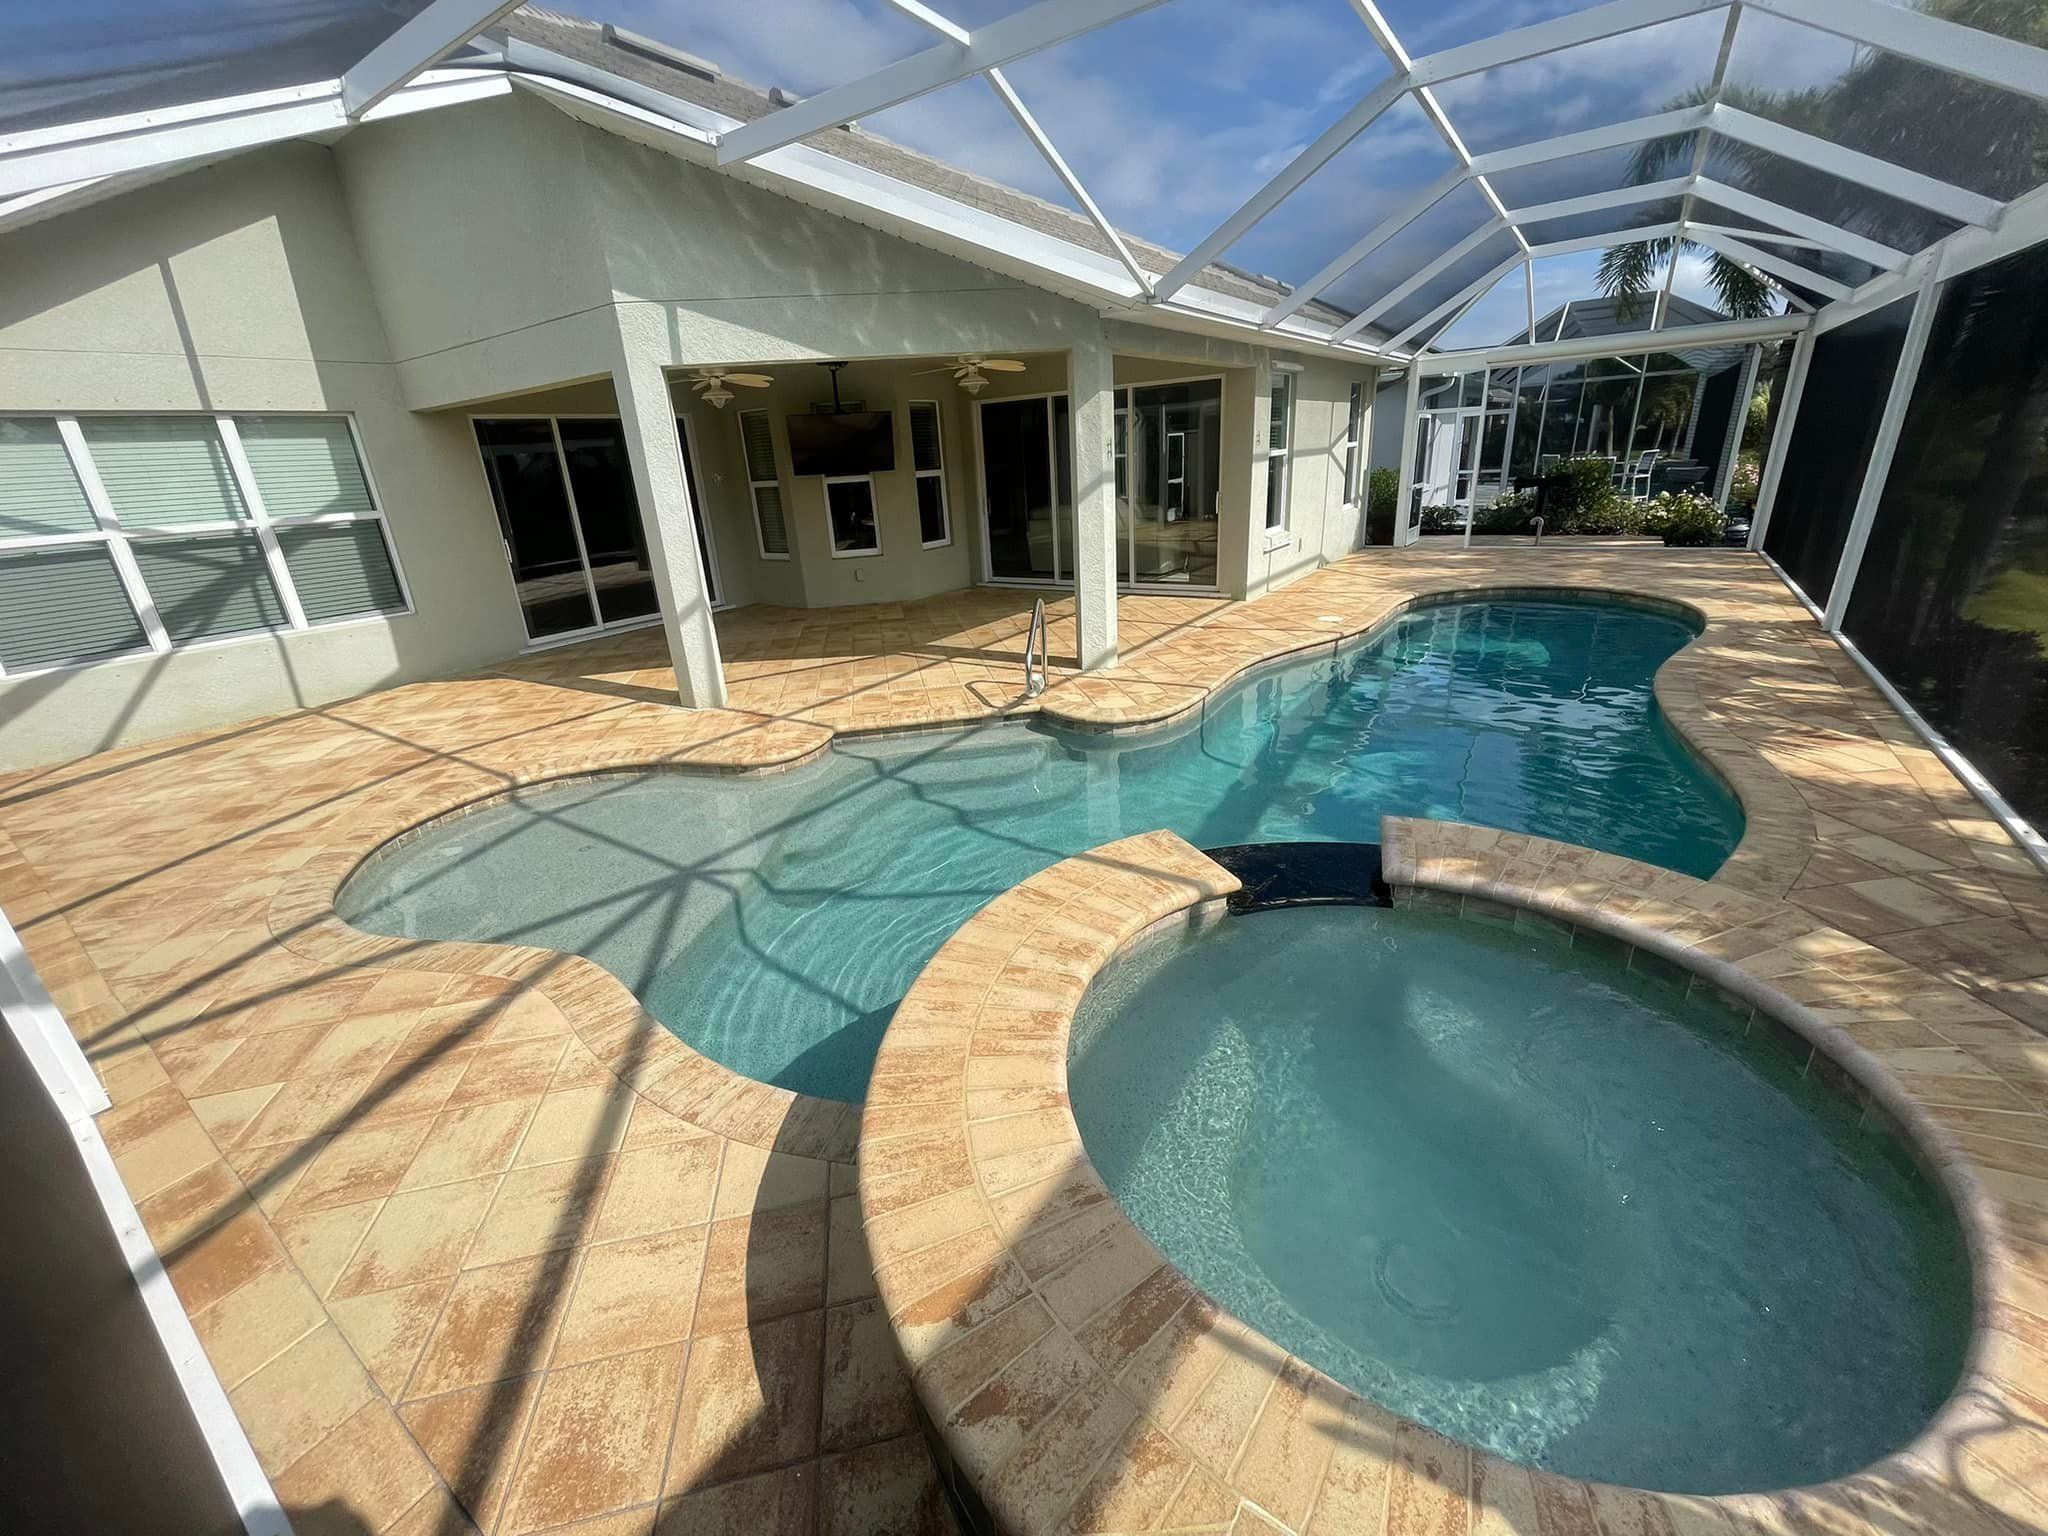  We offer both hot water and cold water pressure washing. We use industry leading cleaners and detergents to ensure the longest lasting, highest quality pressure clean the industry has to offer.  Contact us today to learn more! for Brightside Exterior Cleaning in Cape Coral, FL